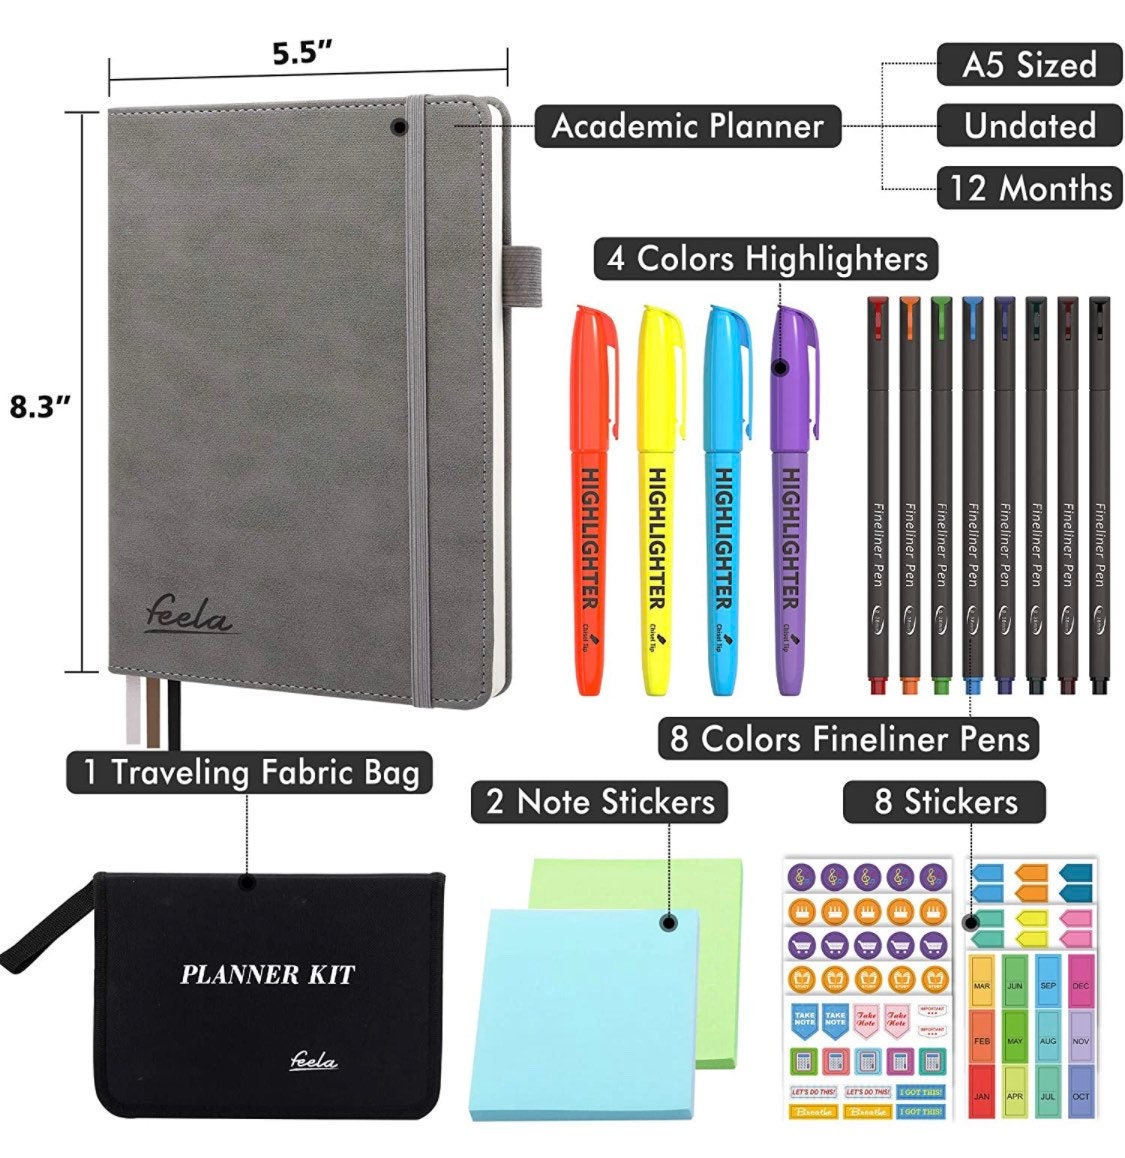 2023 Planner Kit - Minimalist all in one Planner with carry case and accessories